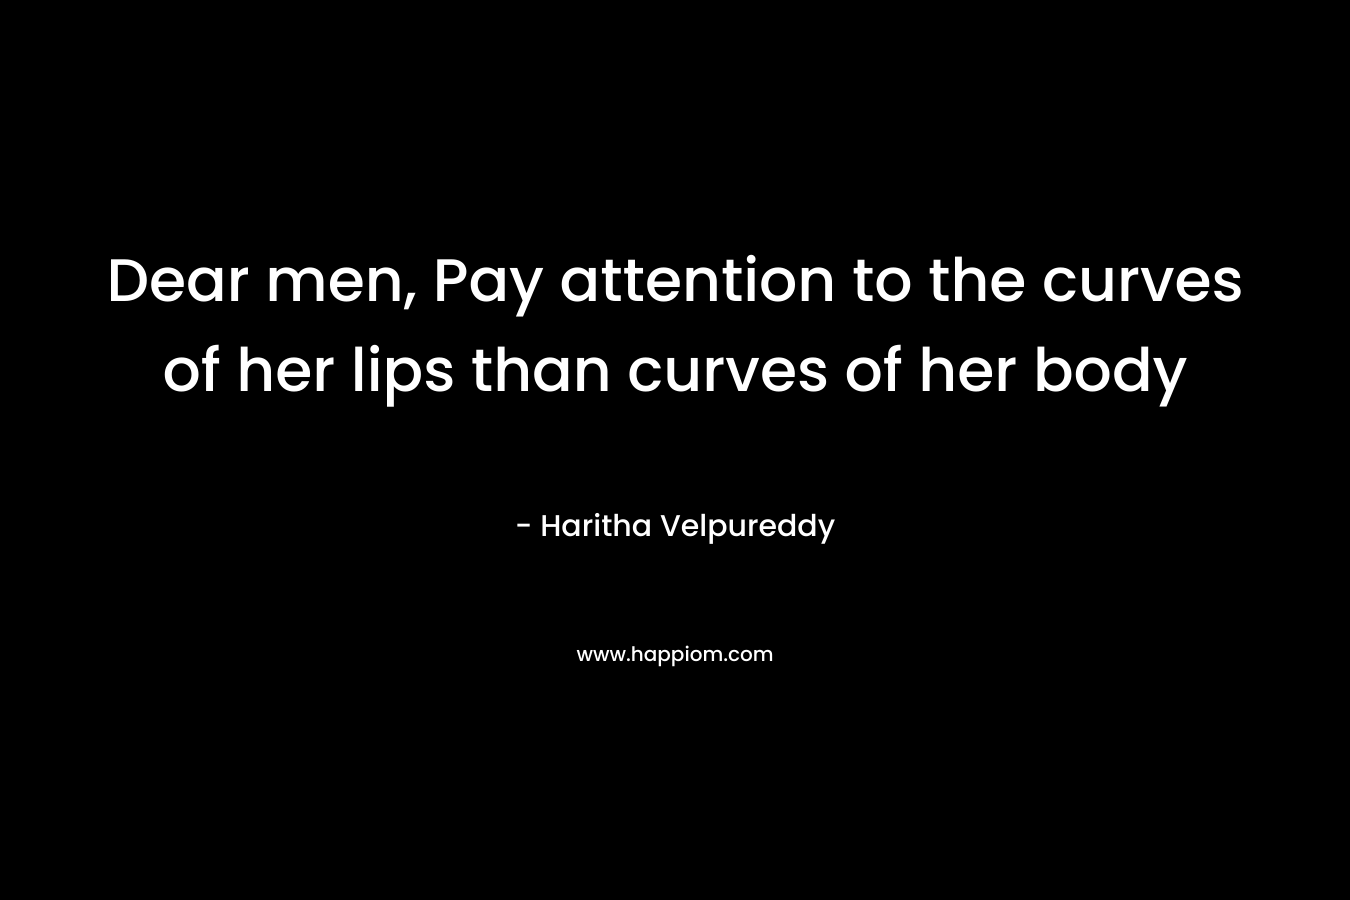 Dear men, Pay attention to the curves of her lips than curves of her body – Haritha Velpureddy